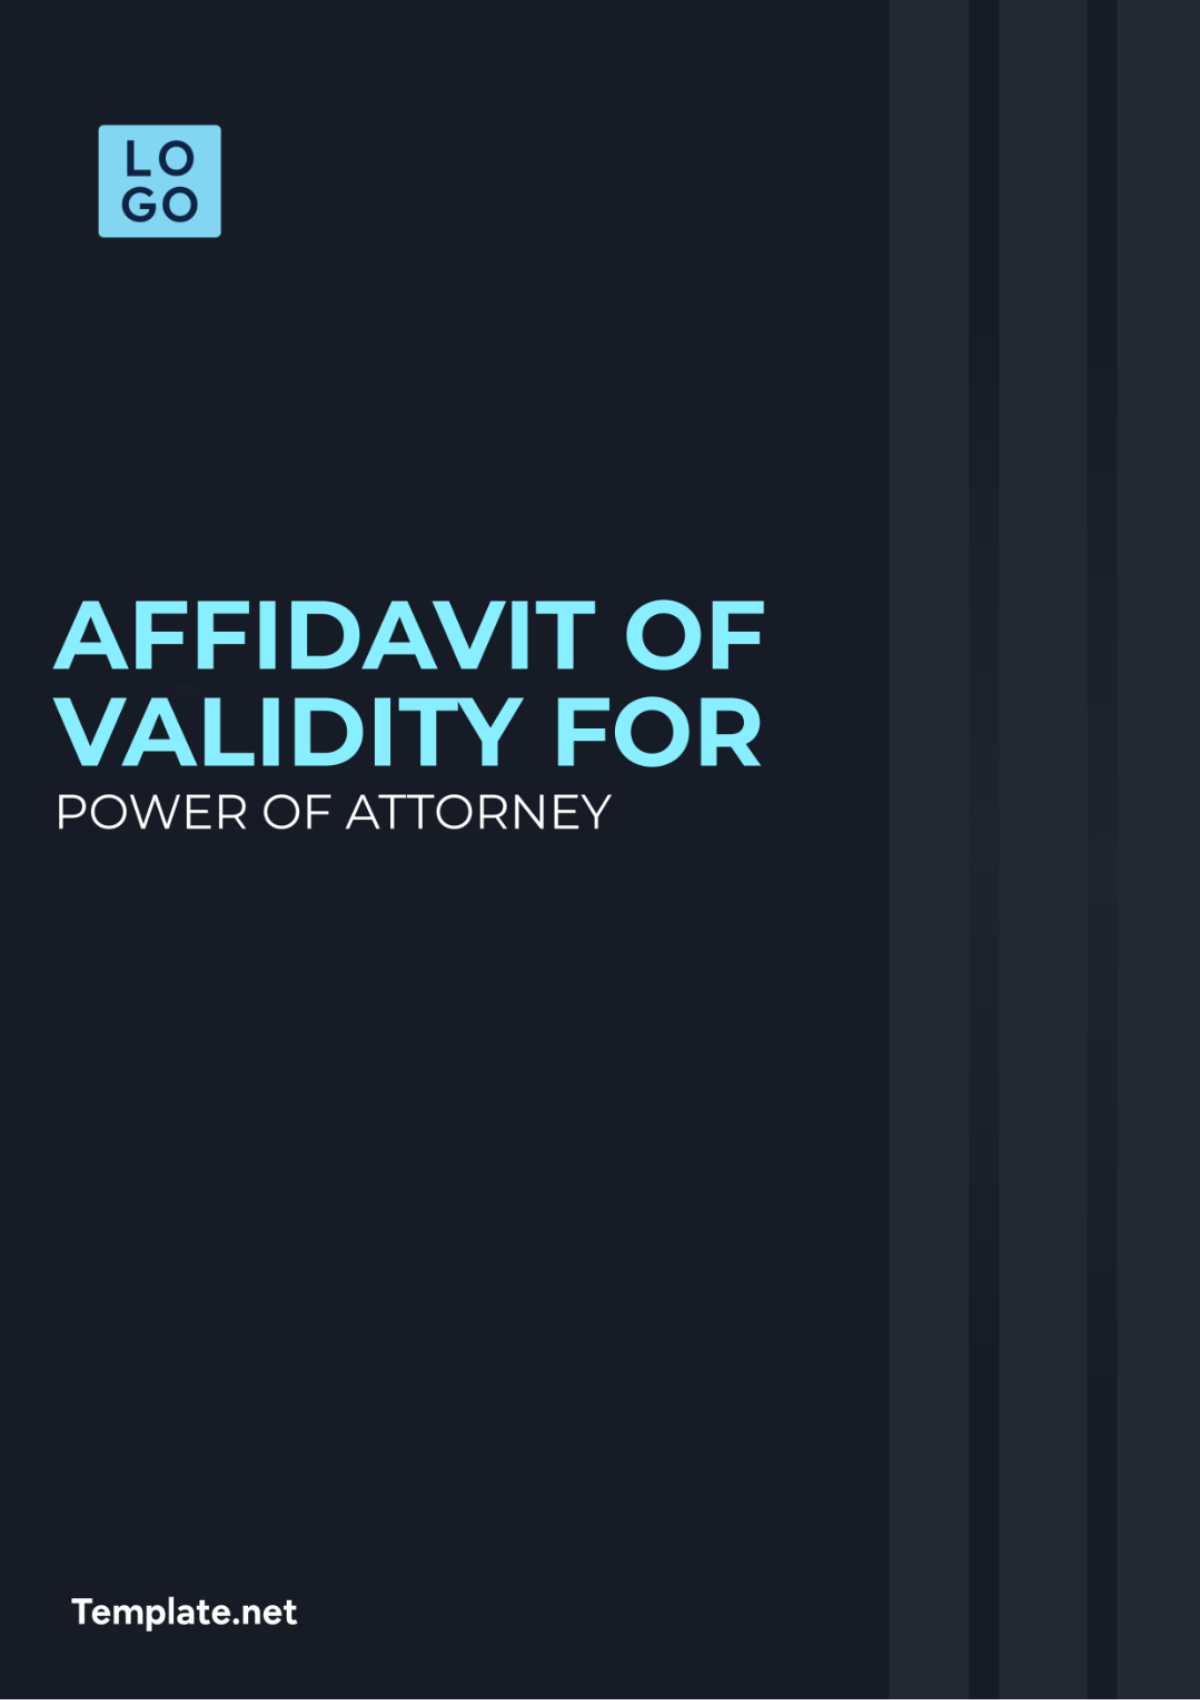 Affidavit Of Validity For Power of Attorney Template